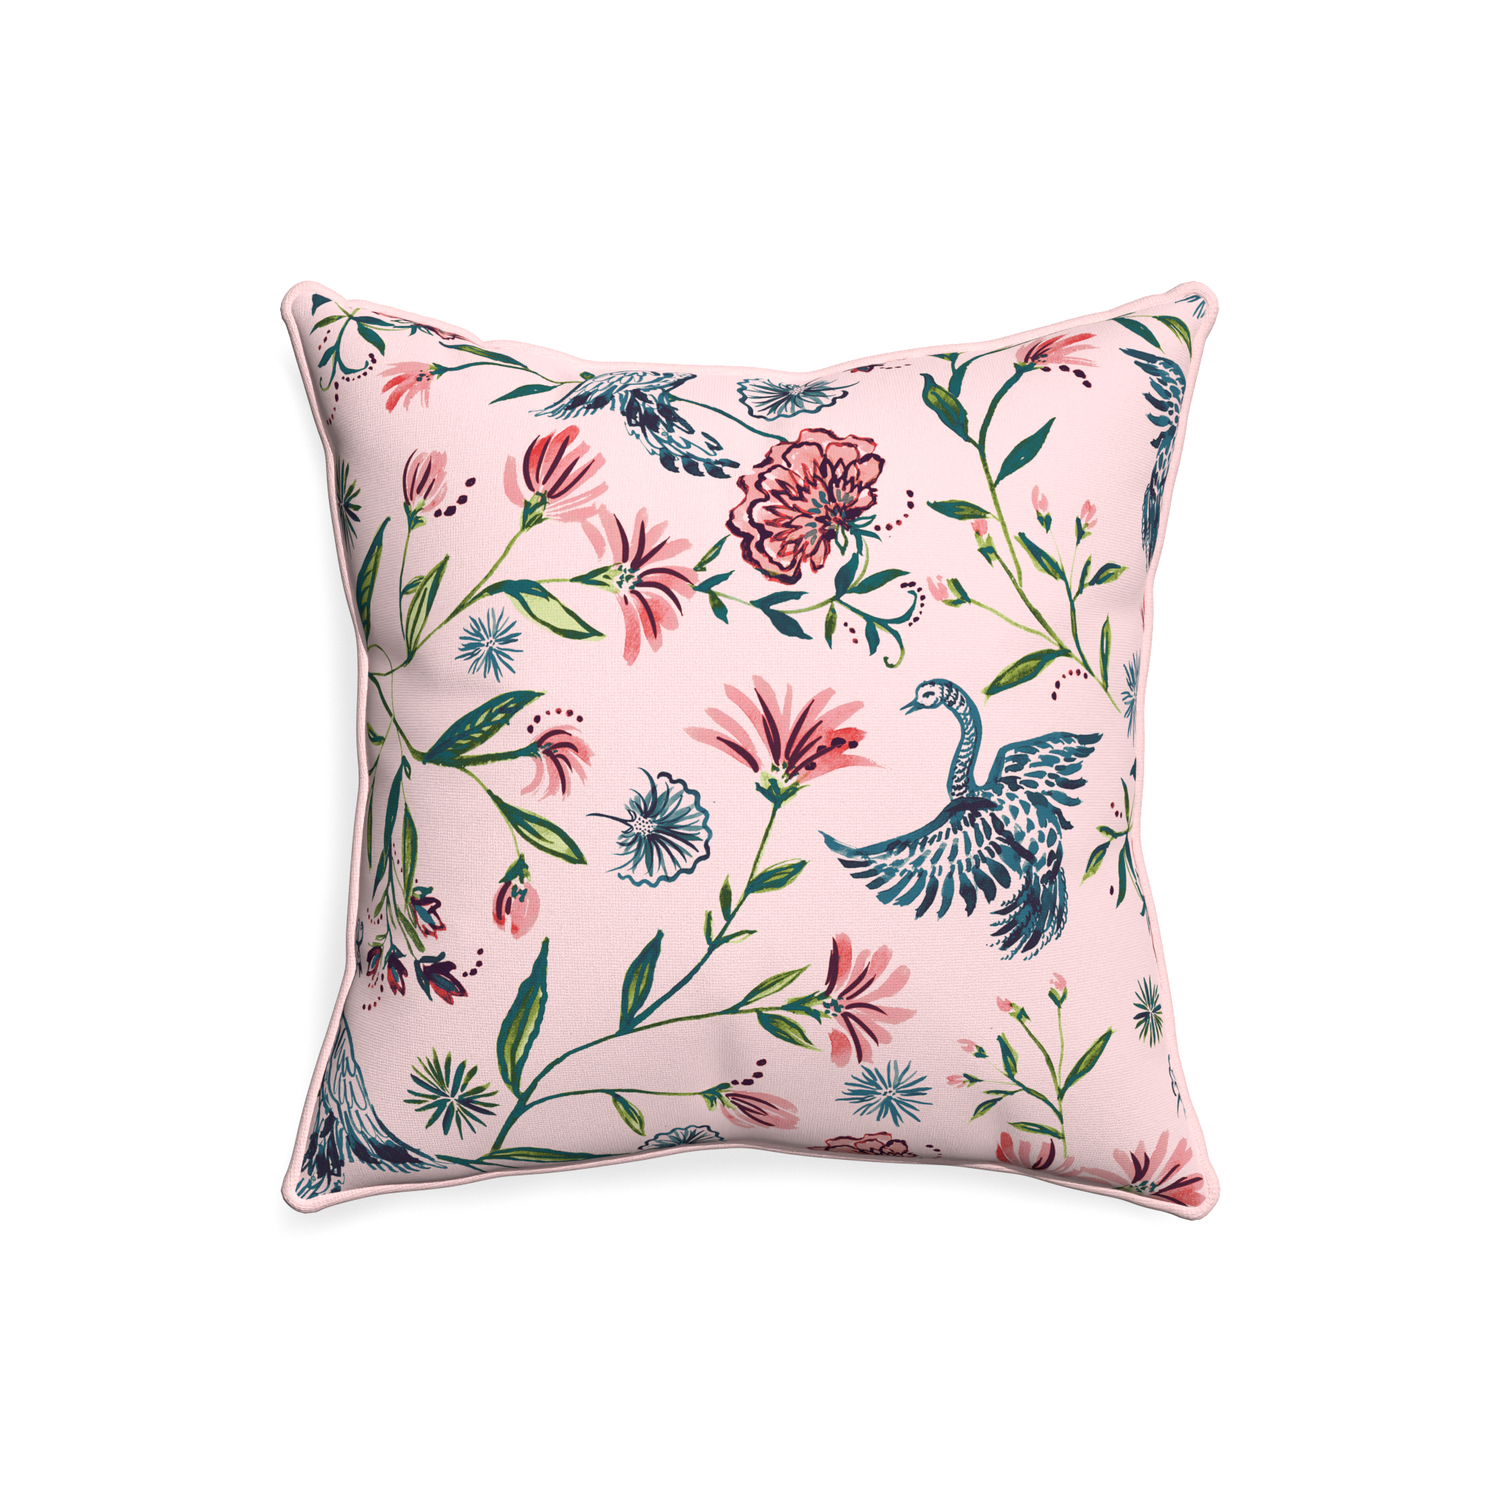 20-square daphne rose custom pillow with petal piping on white background